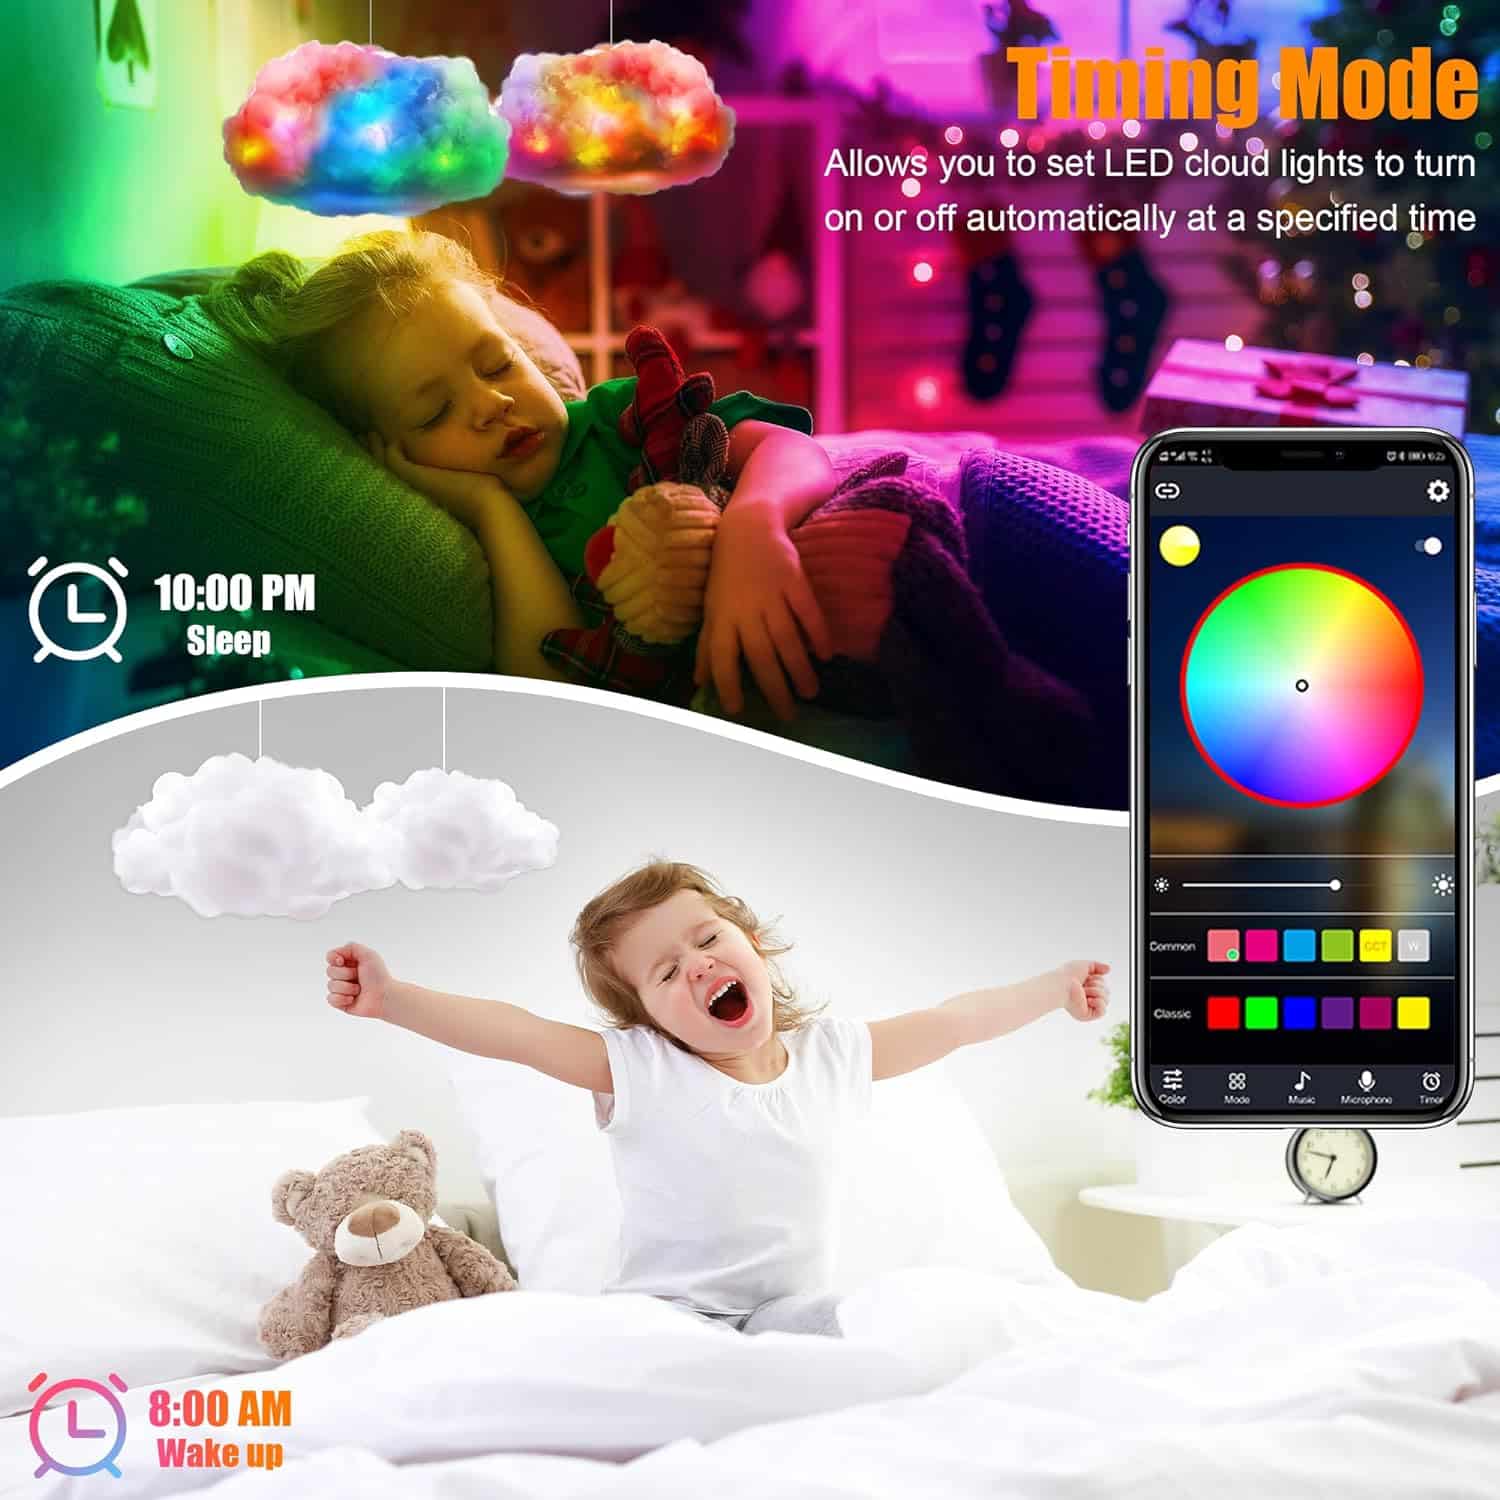 ViLSOM LED Cloud Light,RGB with IC Remote and APP Control Cool Lights Sync Music Color Changing for Bedroom Ceiling Adults and Kids Modern Home Decorations